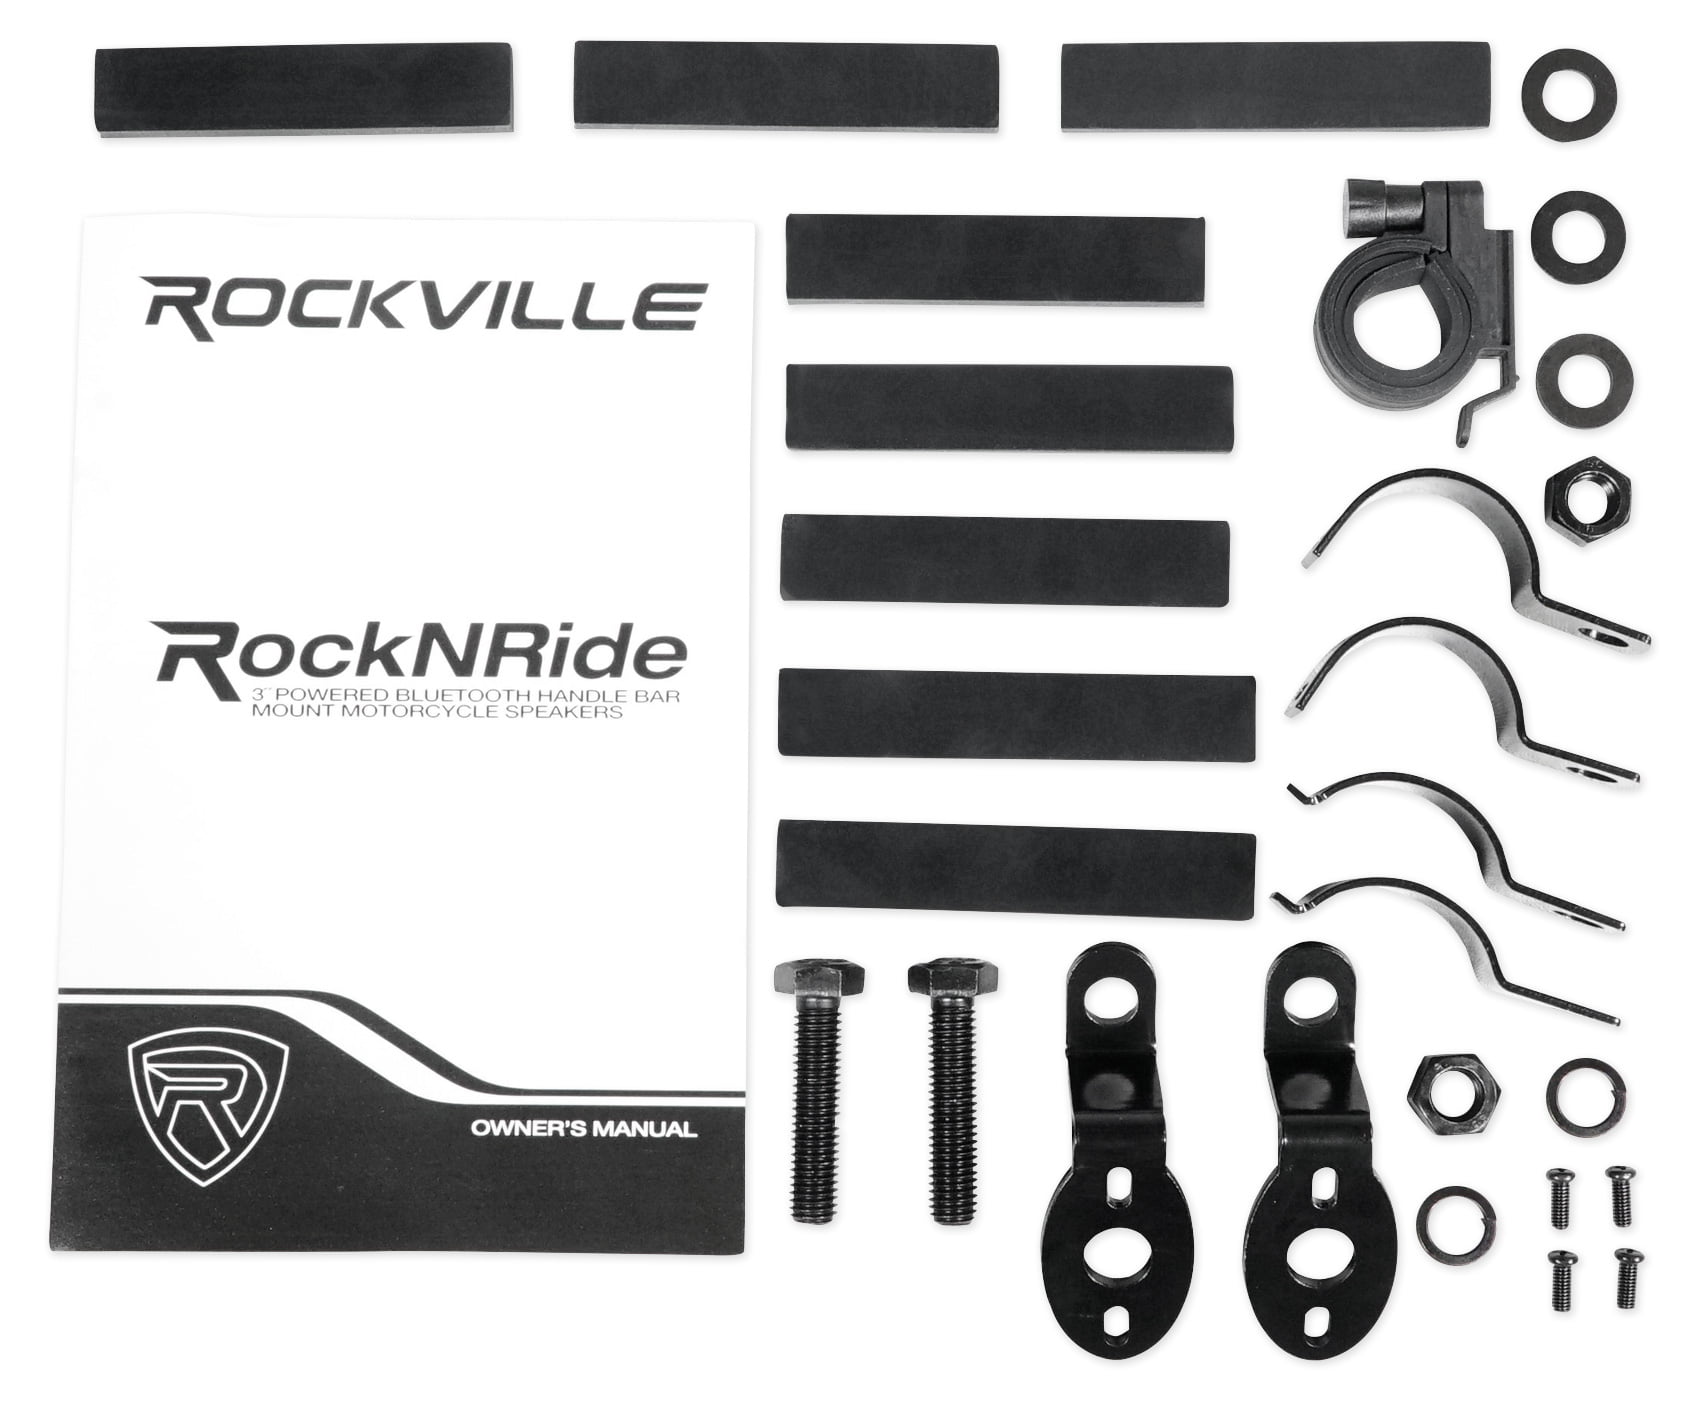 Rockville Bluetooth ATV Audio System w/Handlebar Speakers For Can-Am Renegade 